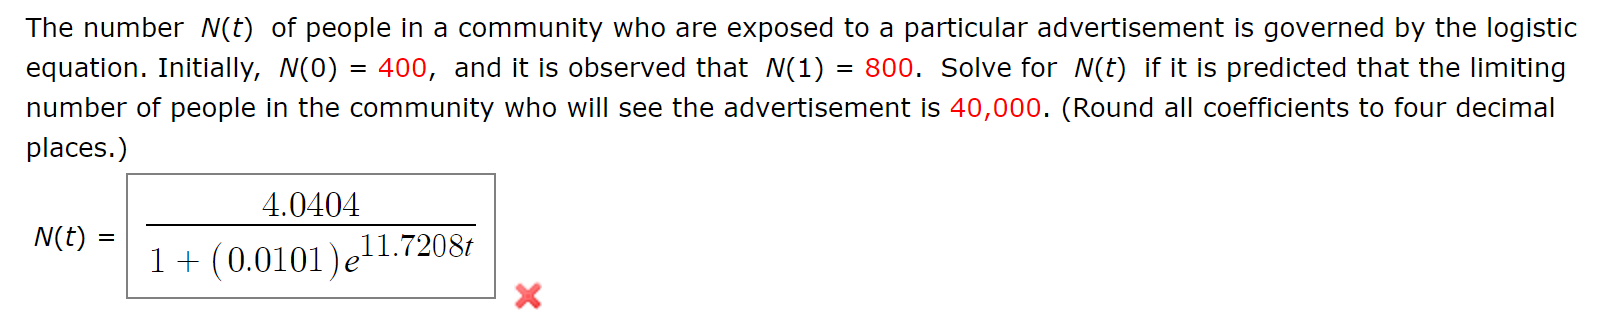 The number N(t) of people in a community who are exposed to a particular advertisement is governed by the logistic
equation. Initially, N(0) = 400, and it is observed that N(1) = 800. Solve for N(t) if it is predicted that the limiting
number of people in the community who will see the advertisement is 40,000. (Round all coefficients to four decimal
